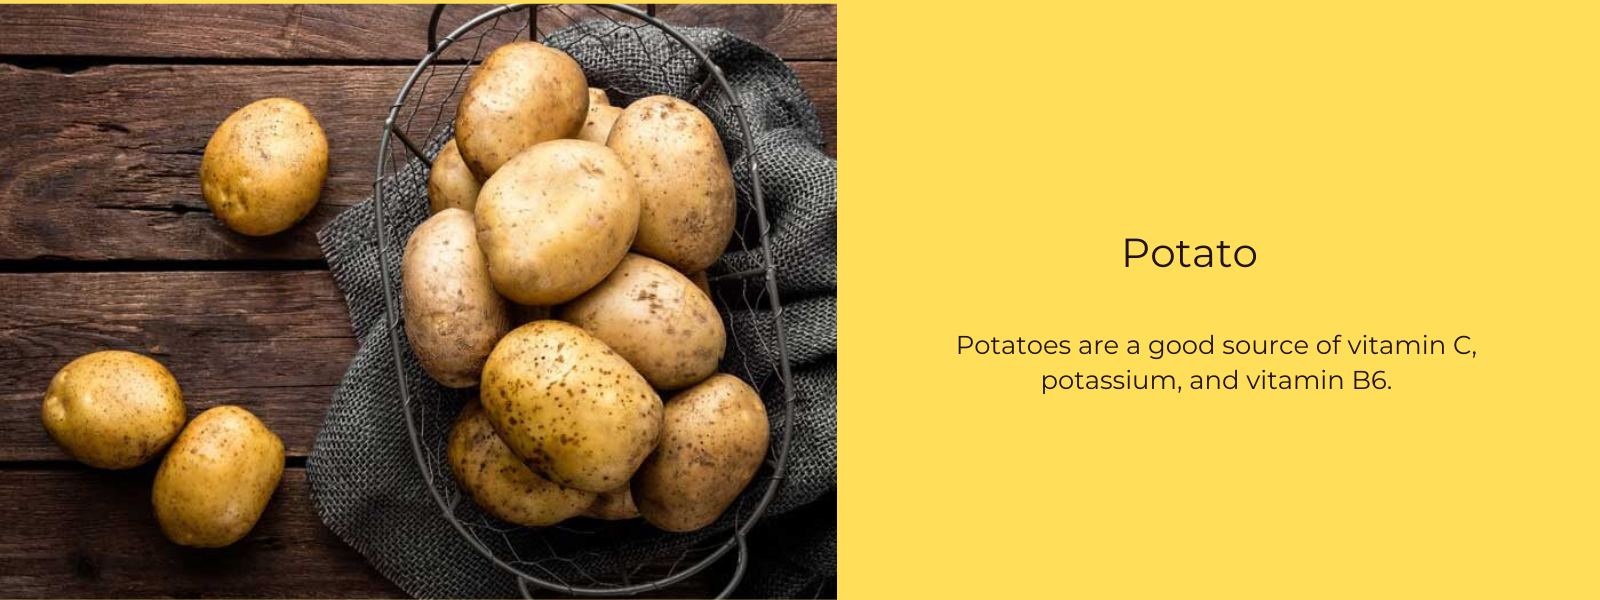 Potato - Health Benefits, Uses and Important Facts